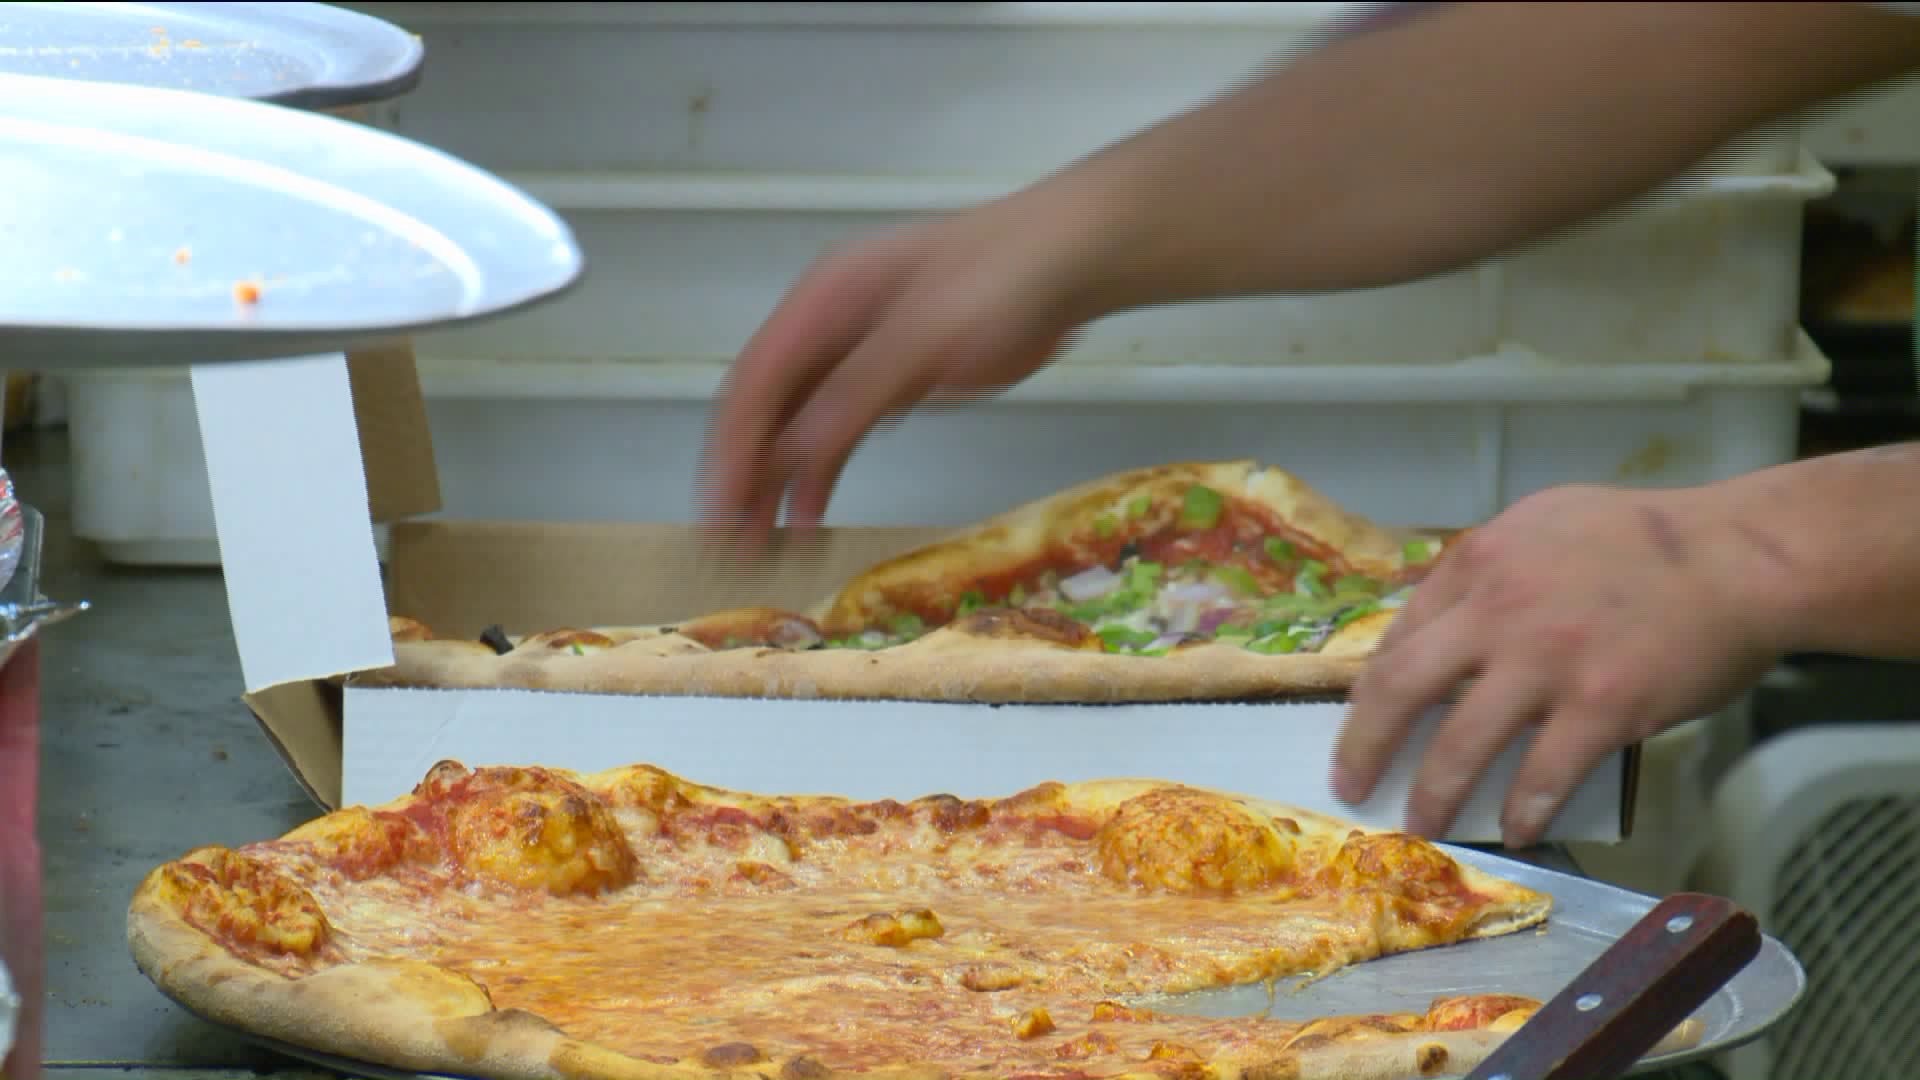 Pizzeria booming with business while thousands still without power